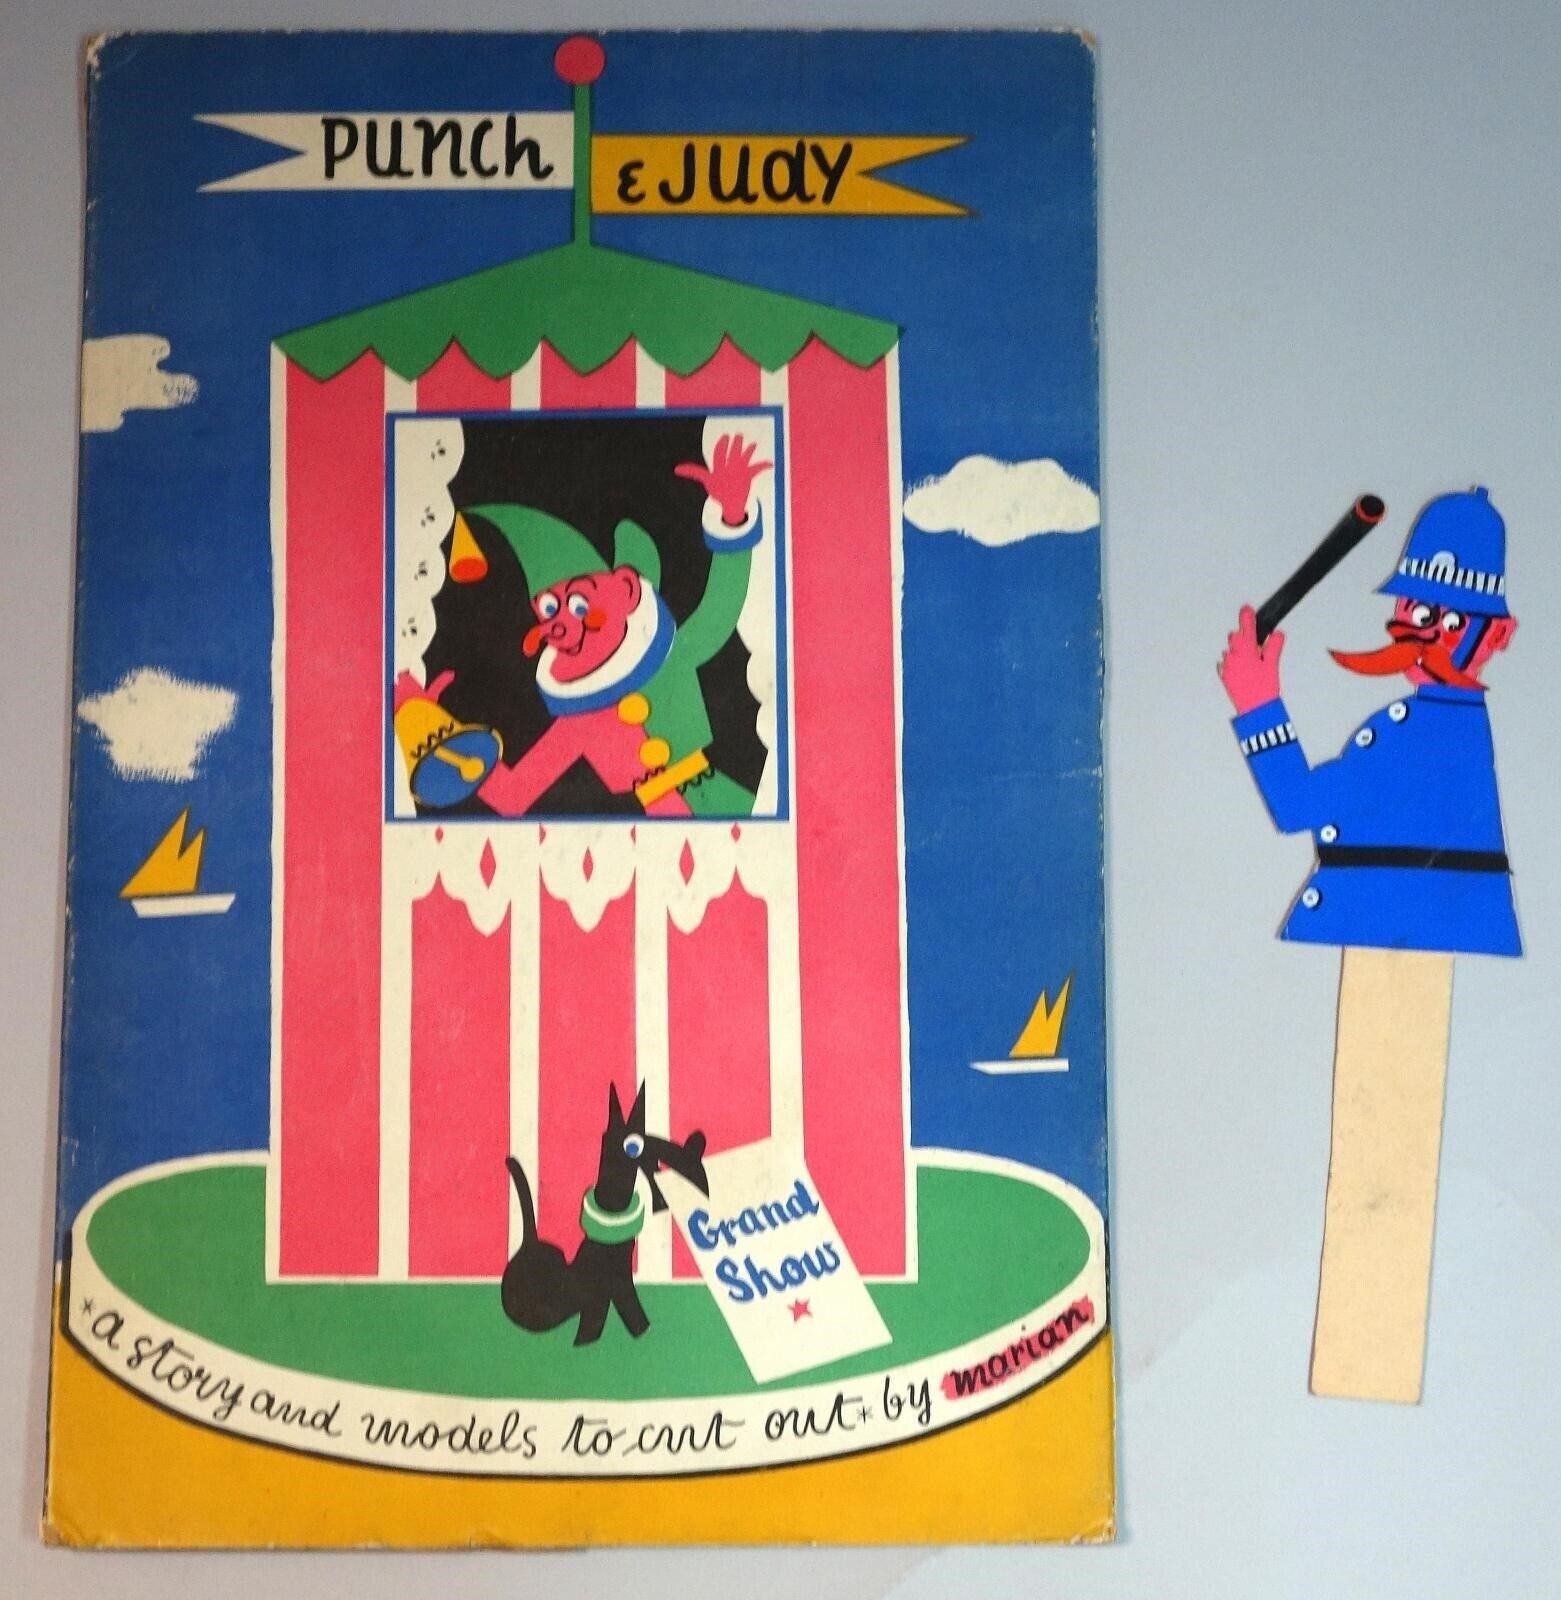 Uncut Theatre Punch & Judy A story & Models to Cut out by Marion w Original Art